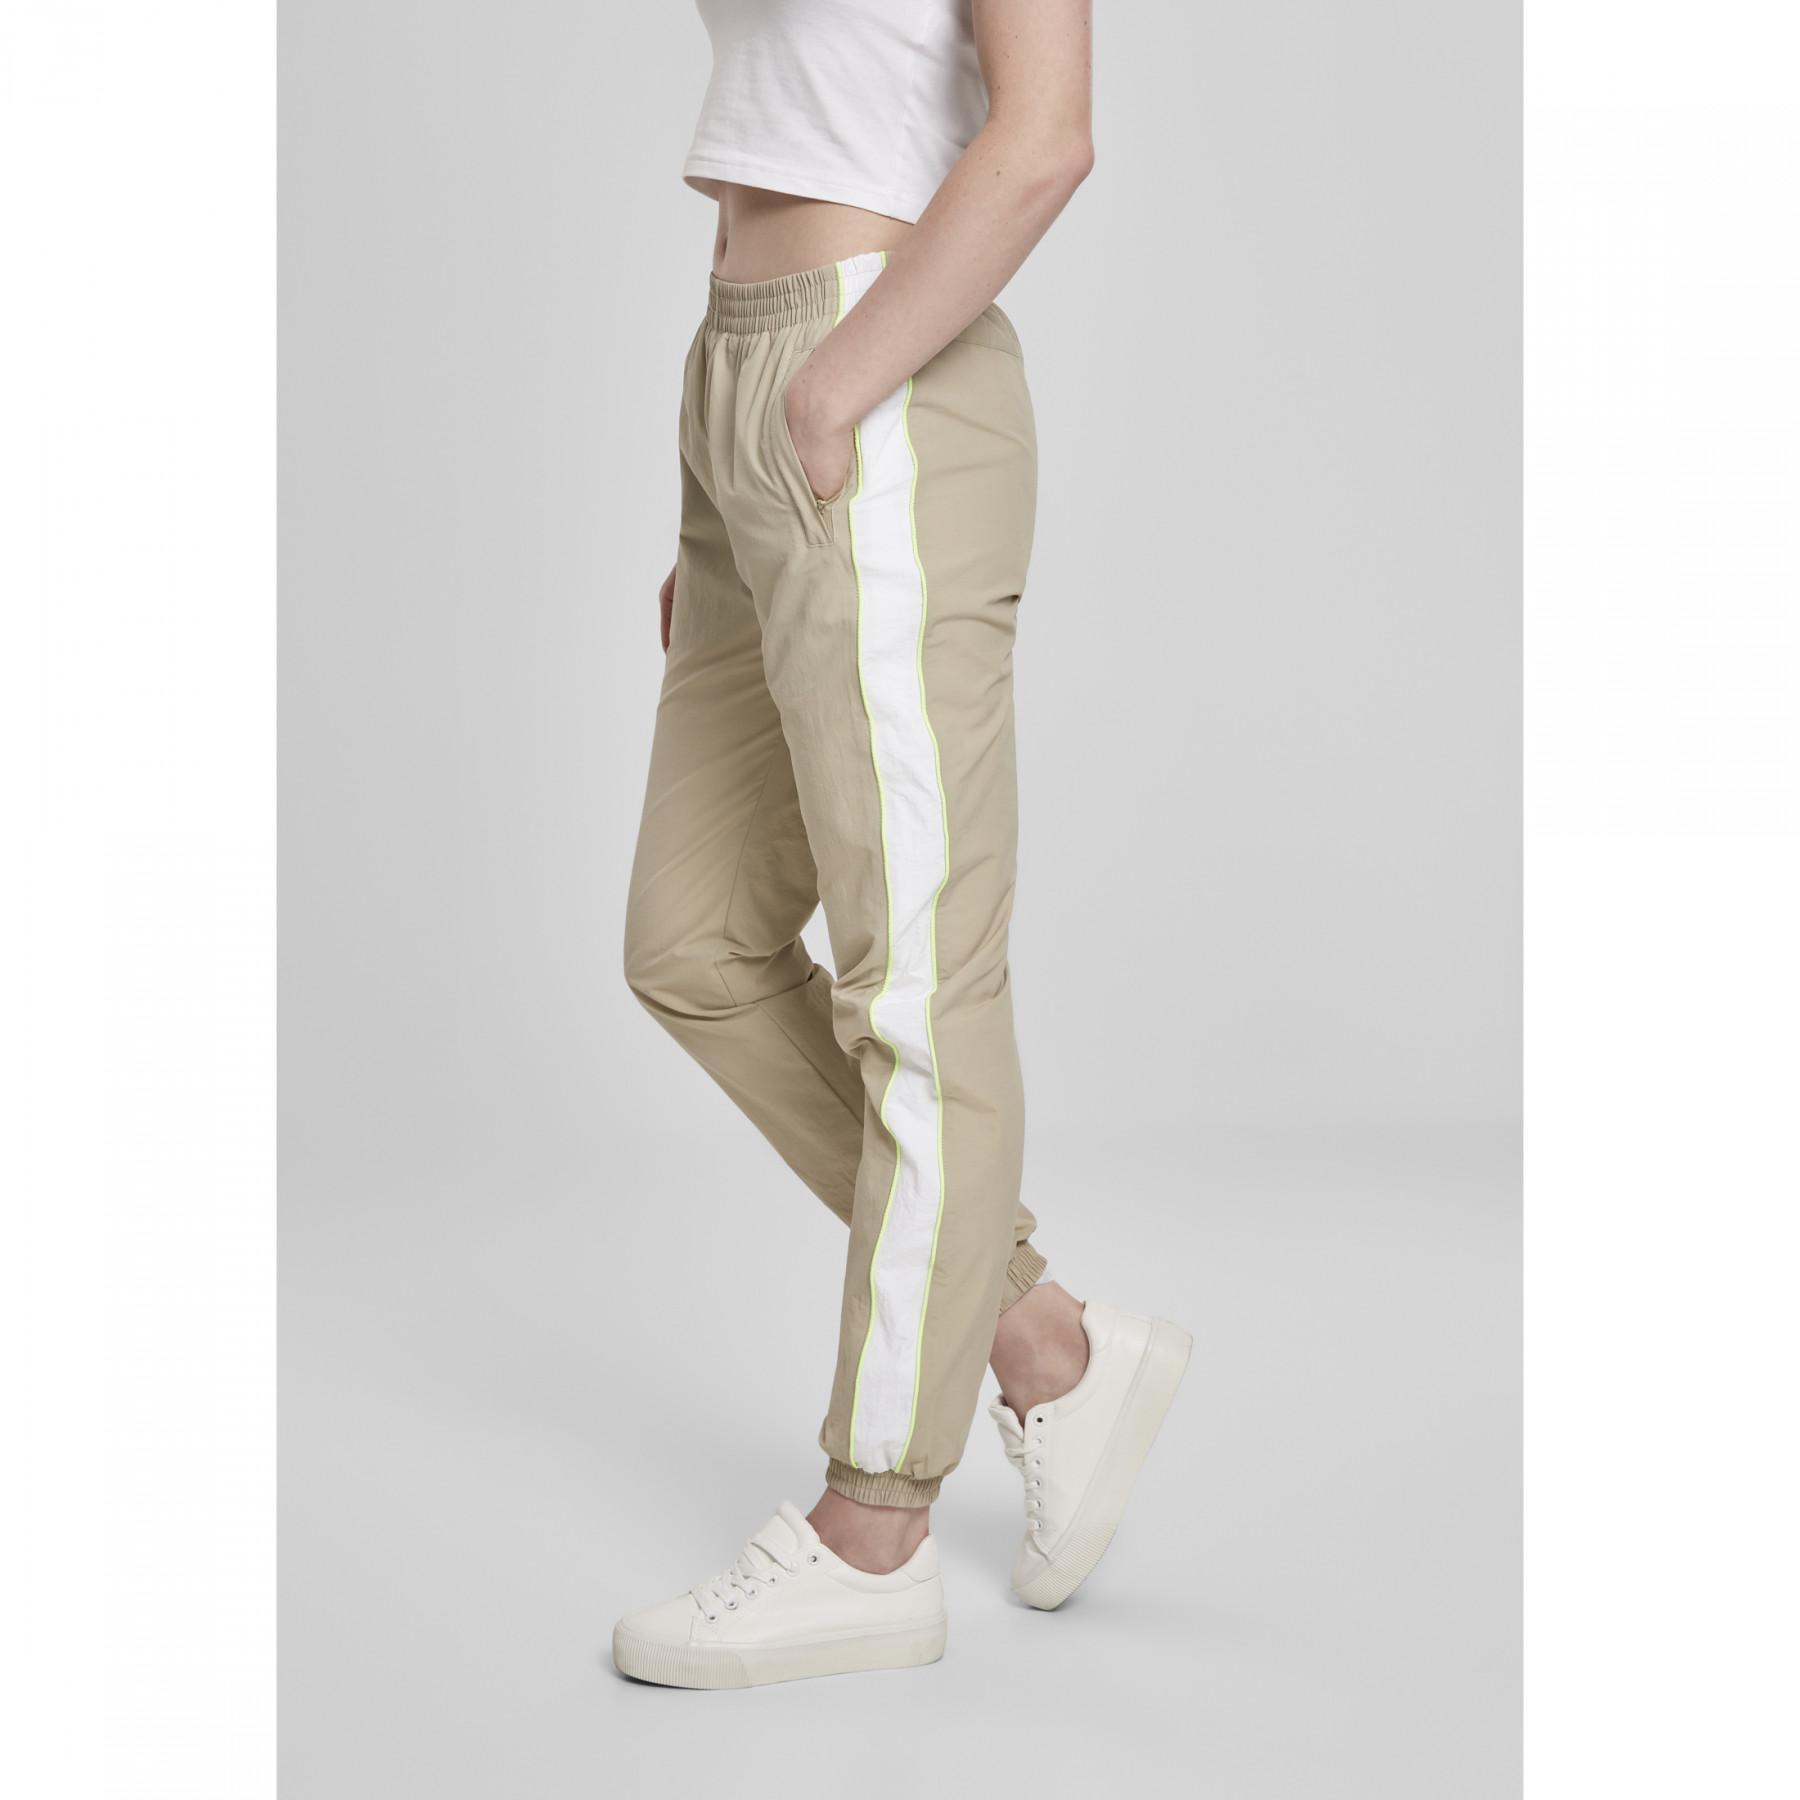 Pantalon femme grandes tailles Urban Classic piped 